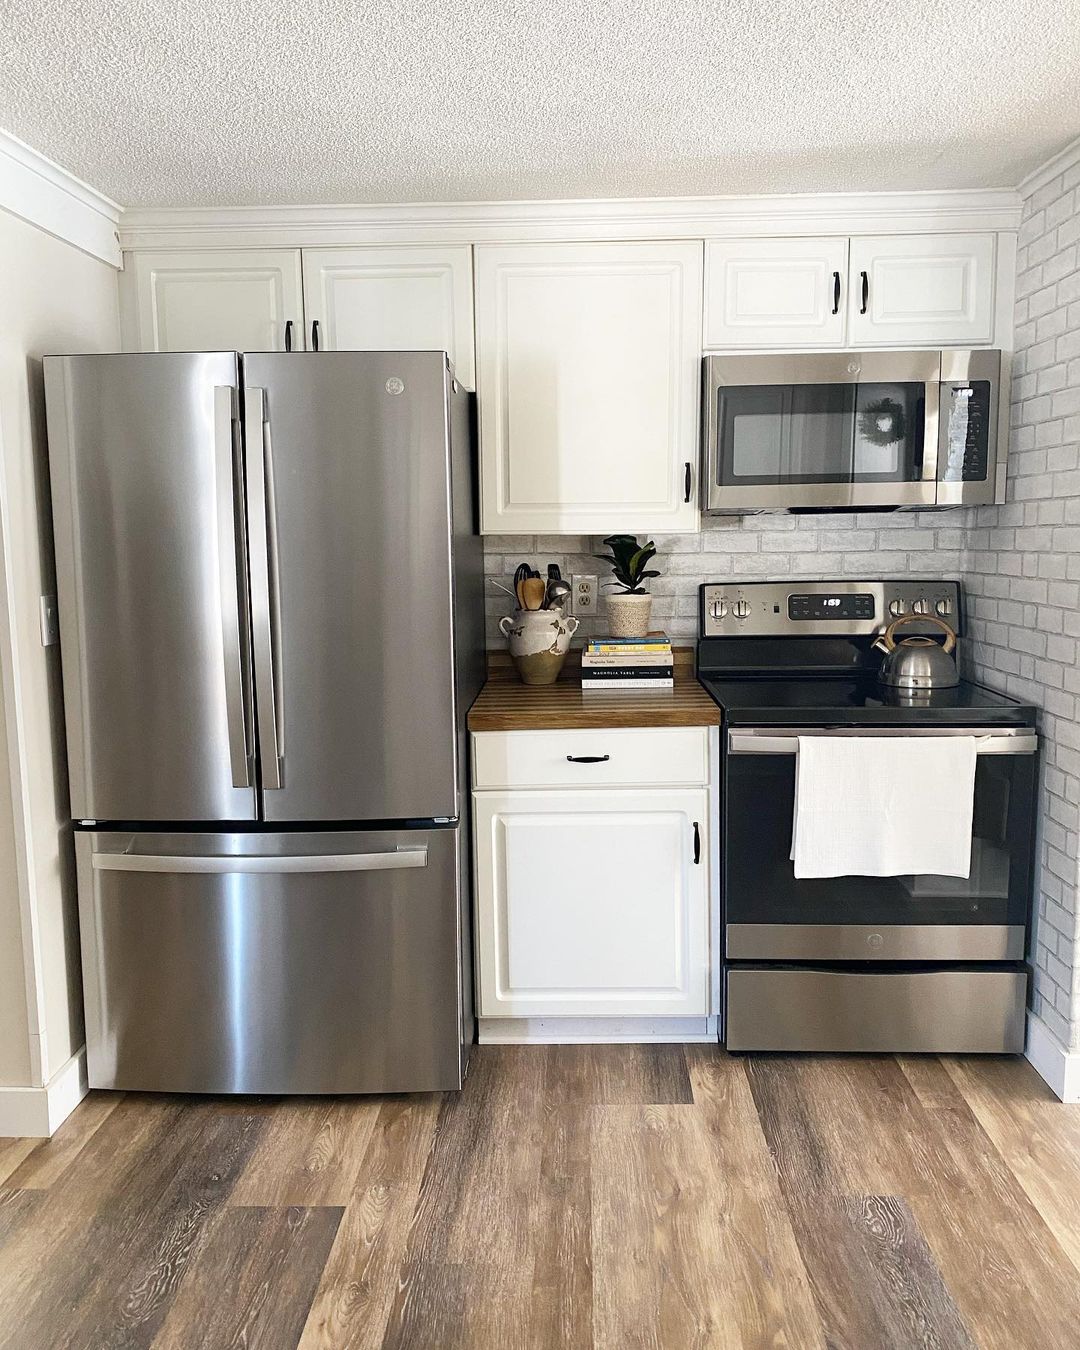 Small kitchen with stainless steel fridge, oven, and microwave. Photo by Instagram user @hearthandclove